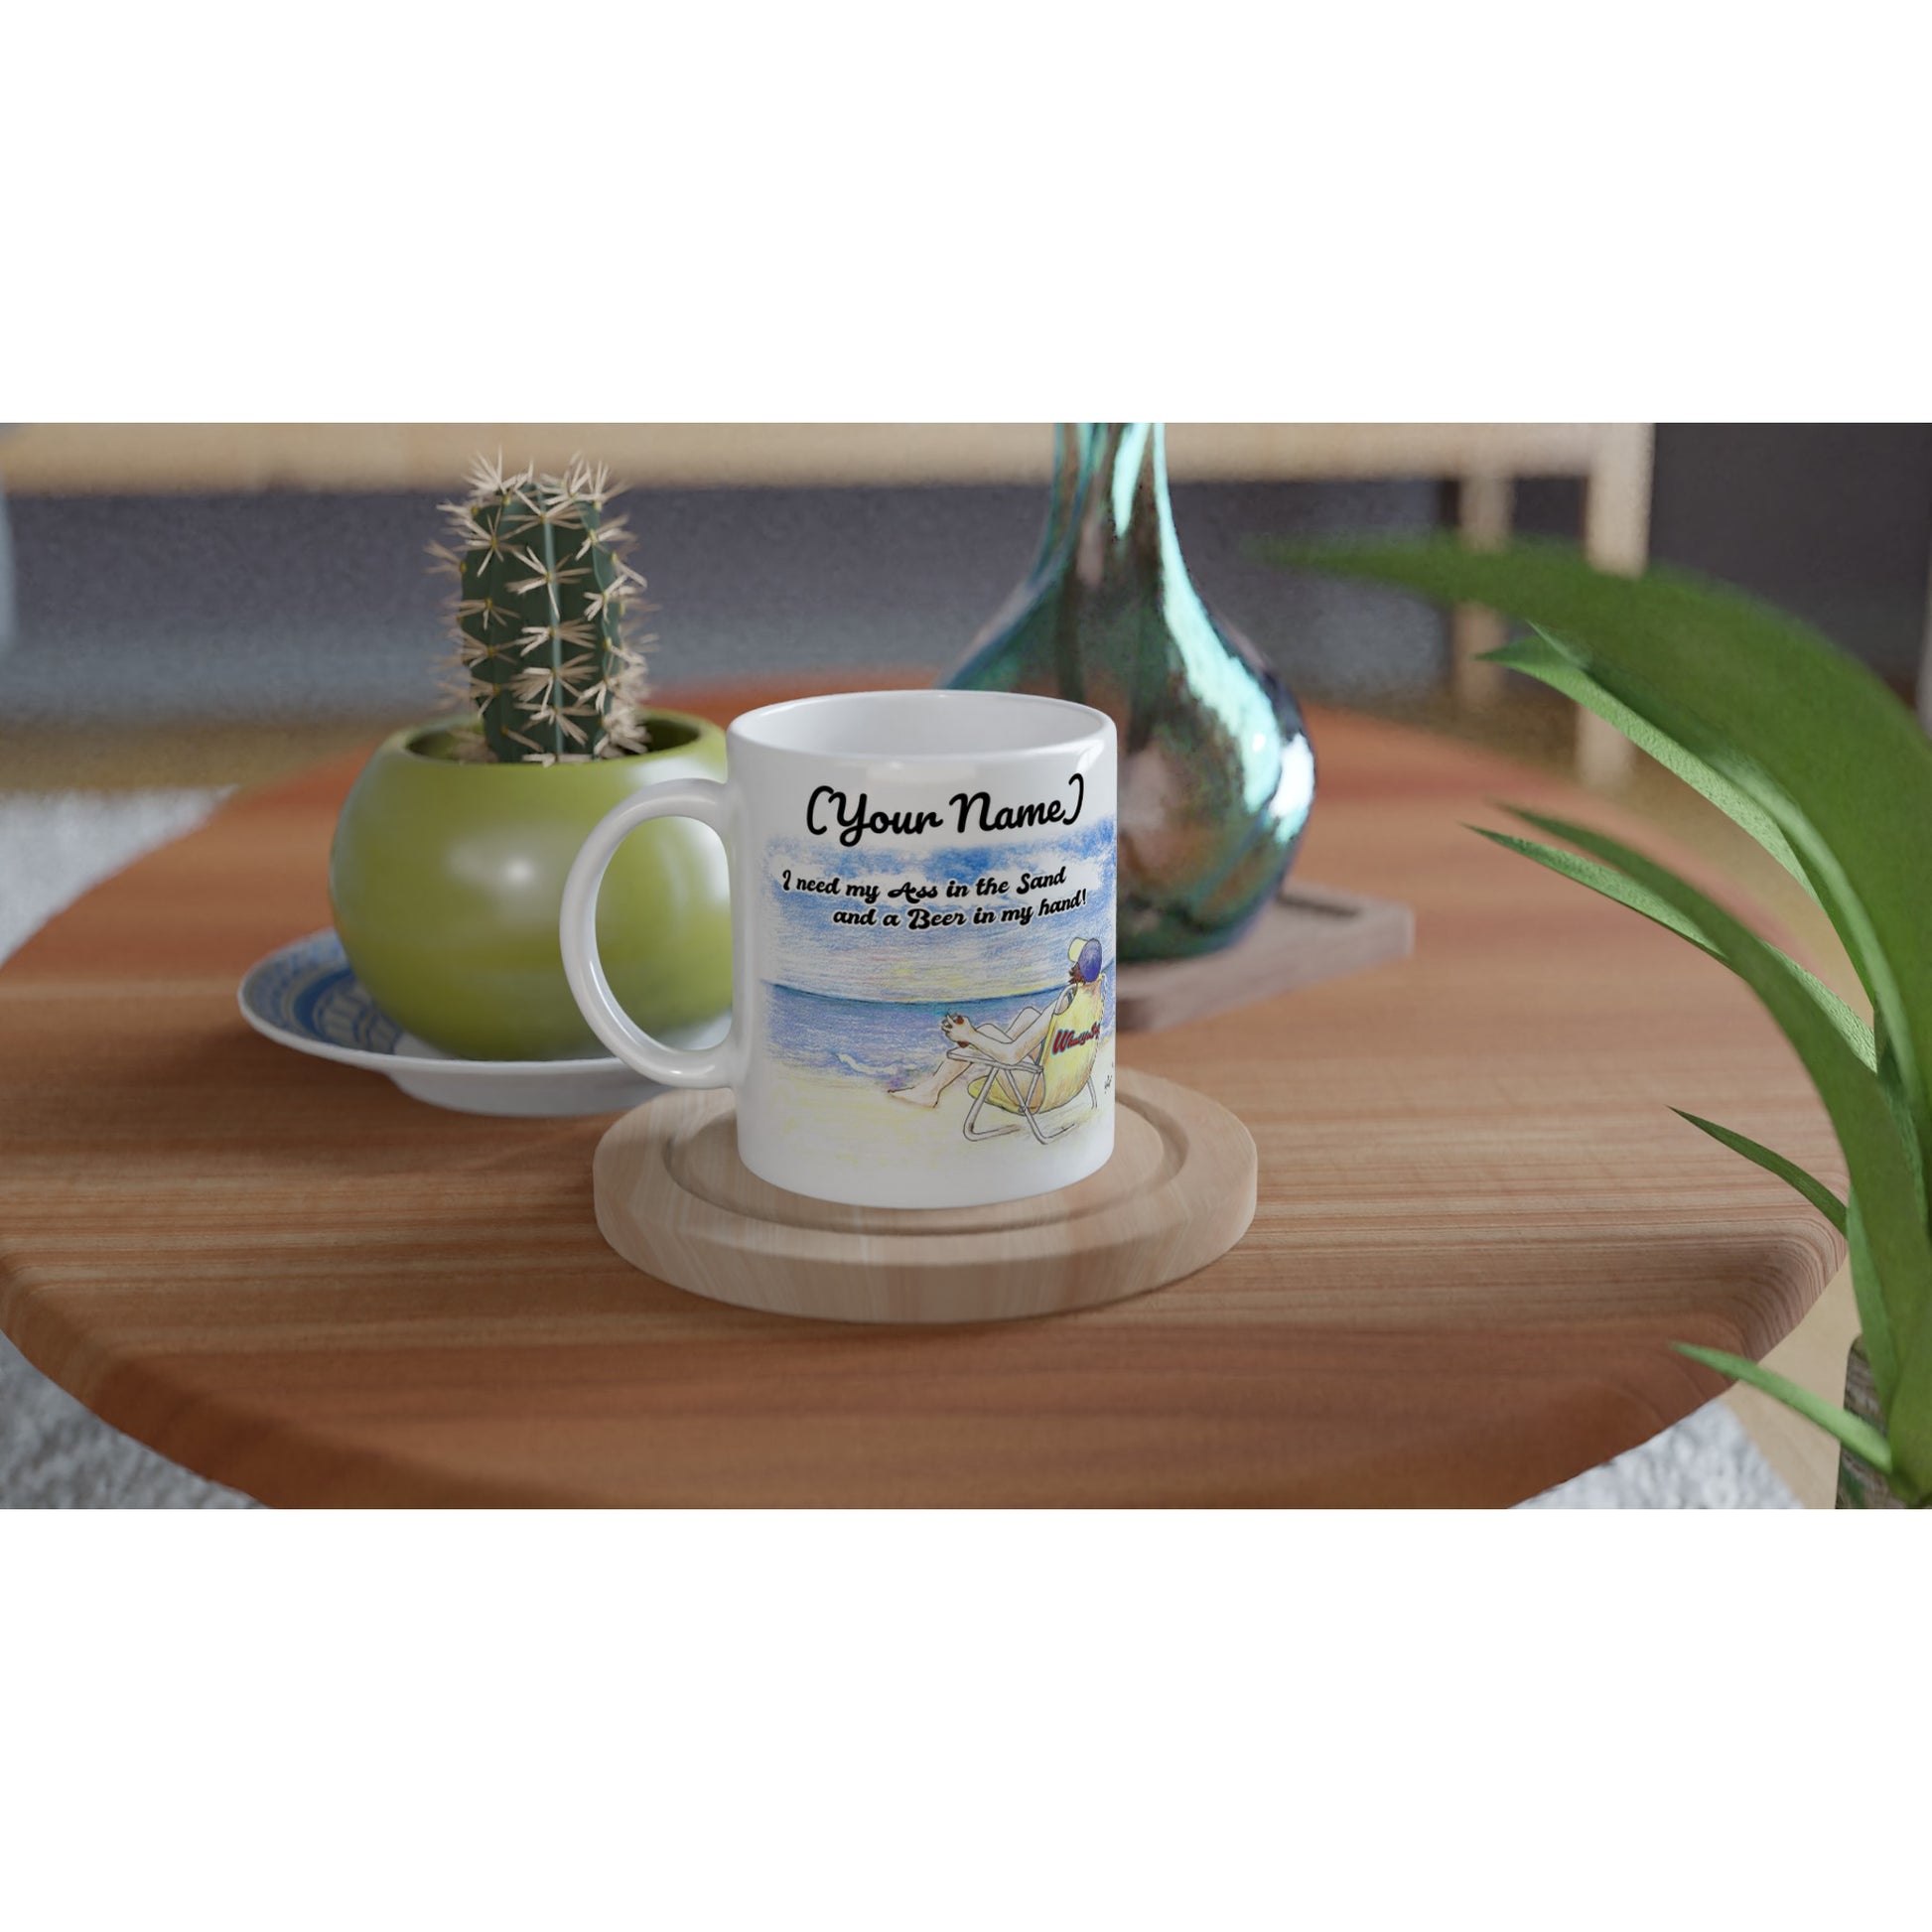 Personalized white ceramic 11oz mug with personalized motto [Enter Name] I need my Ass in the Sand and a Beer in my hand on front and WhatYa Say logo on back dishwasher and microwave safe from WhatYa Say Apparel sitting on coaster with cactus in a green pot and silver vase.